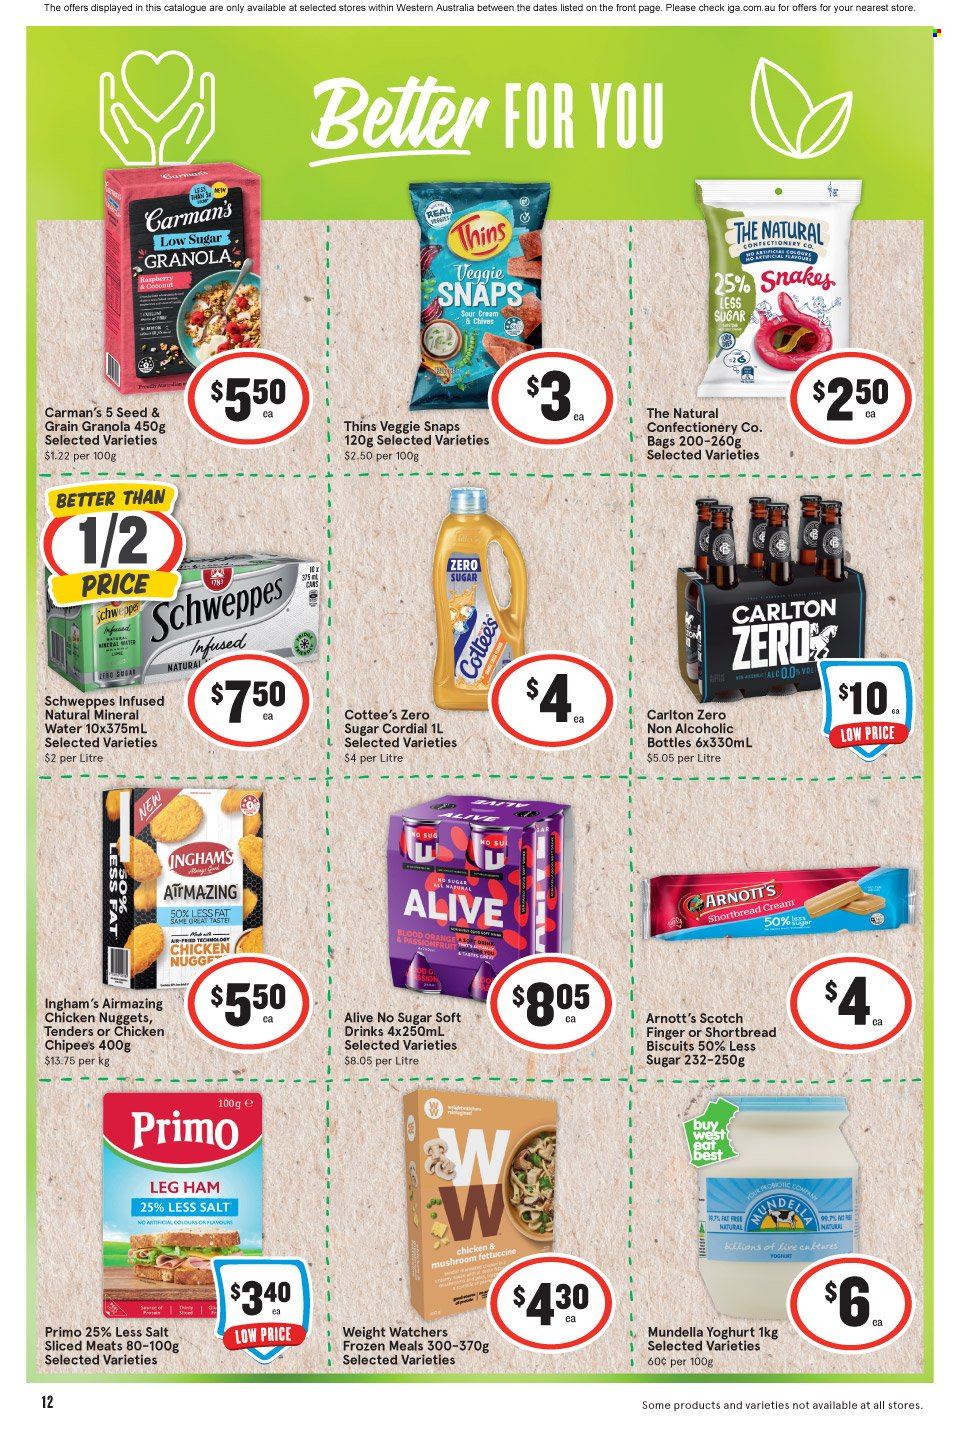 thumbnail - IGA Catalogue - 1 Feb 2023 - 7 Feb 2023 - Sales products - chives, nuggets, chicken nuggets, ham, leg ham, yoghurt, biscuit, Thins, salt, granola, Schweppes, mineral water, bag. Page 13.